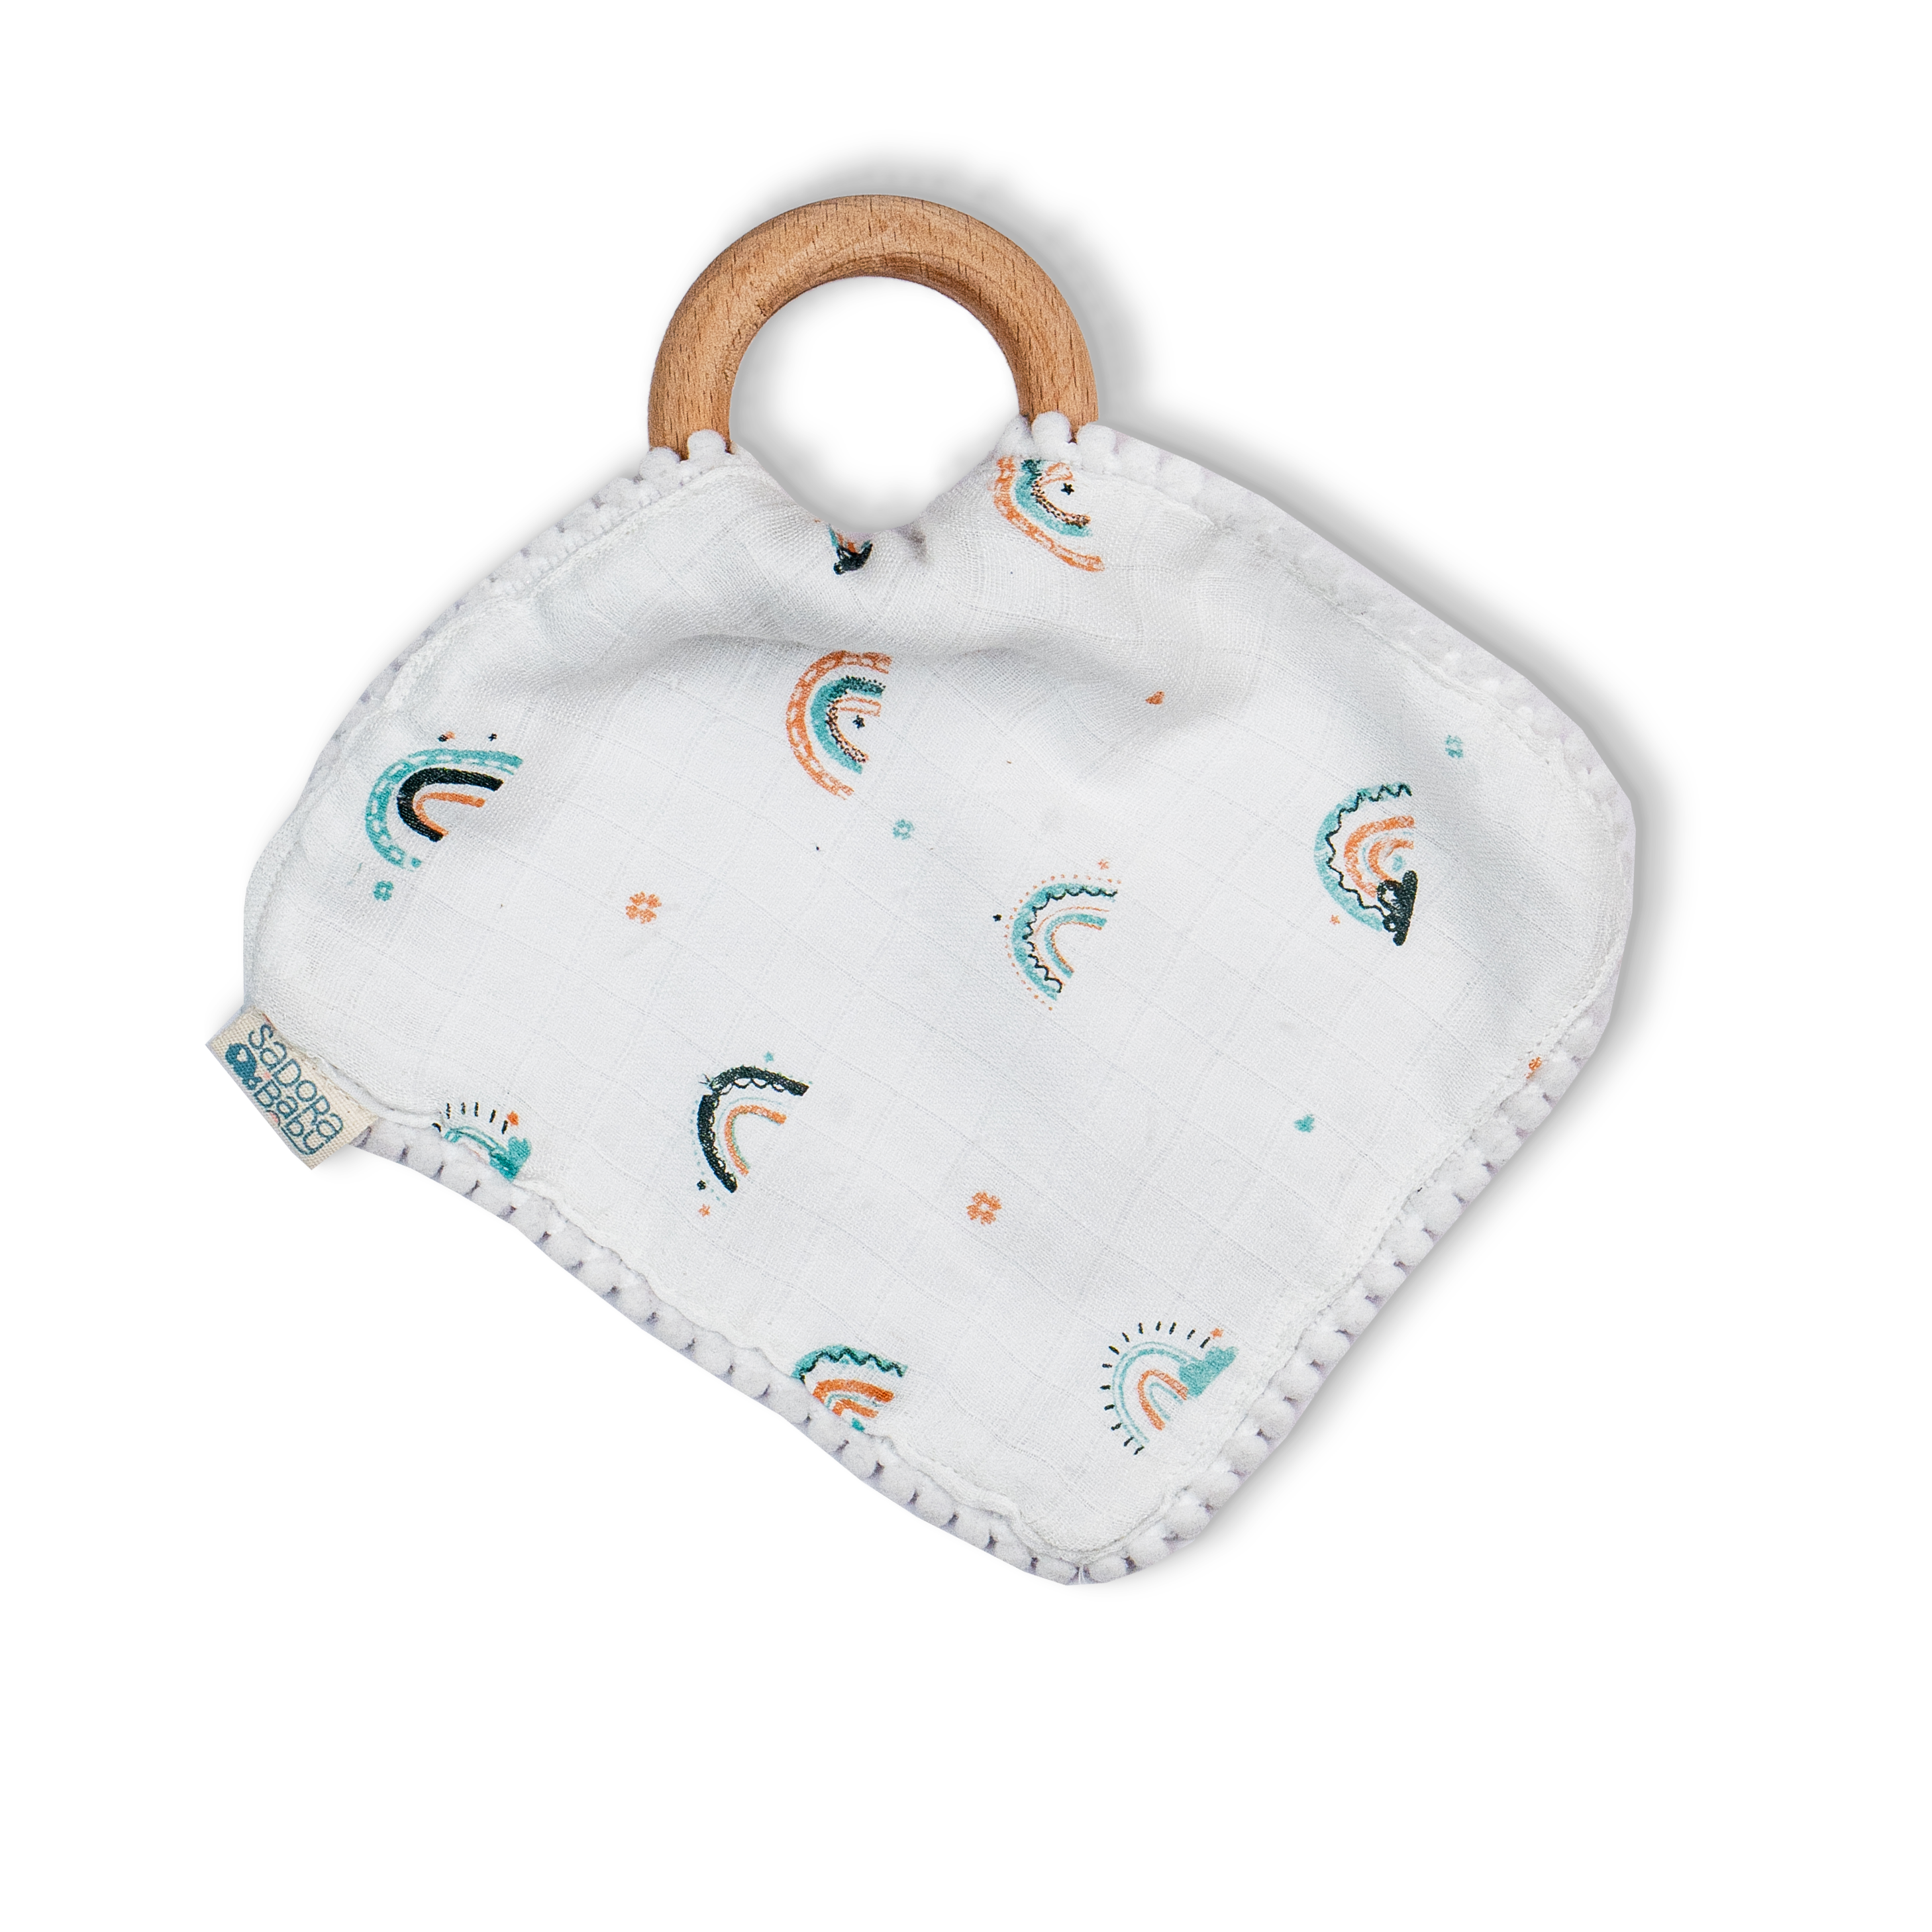 Pacifier Cloth With Wooden Ring / Aeroplane / Hot Air Balloon / Rainbow